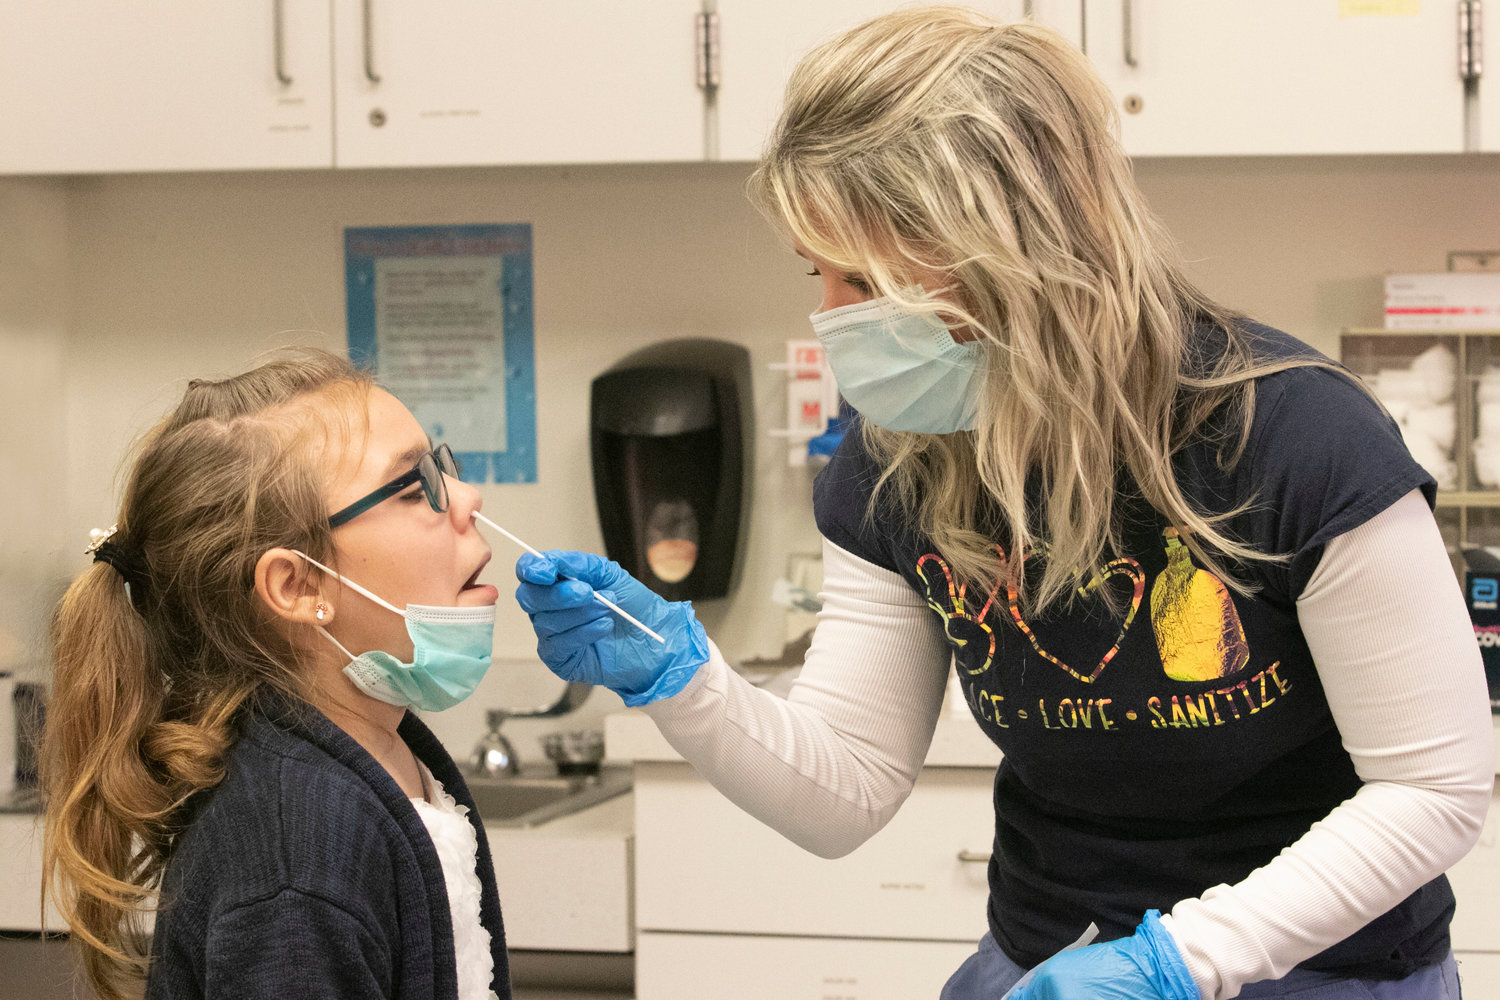 Colt Andrews Elementary School Nurse Julie Pirri tests fourth-grader Emma Gray for Covid at the school the week before Christmas vacation.